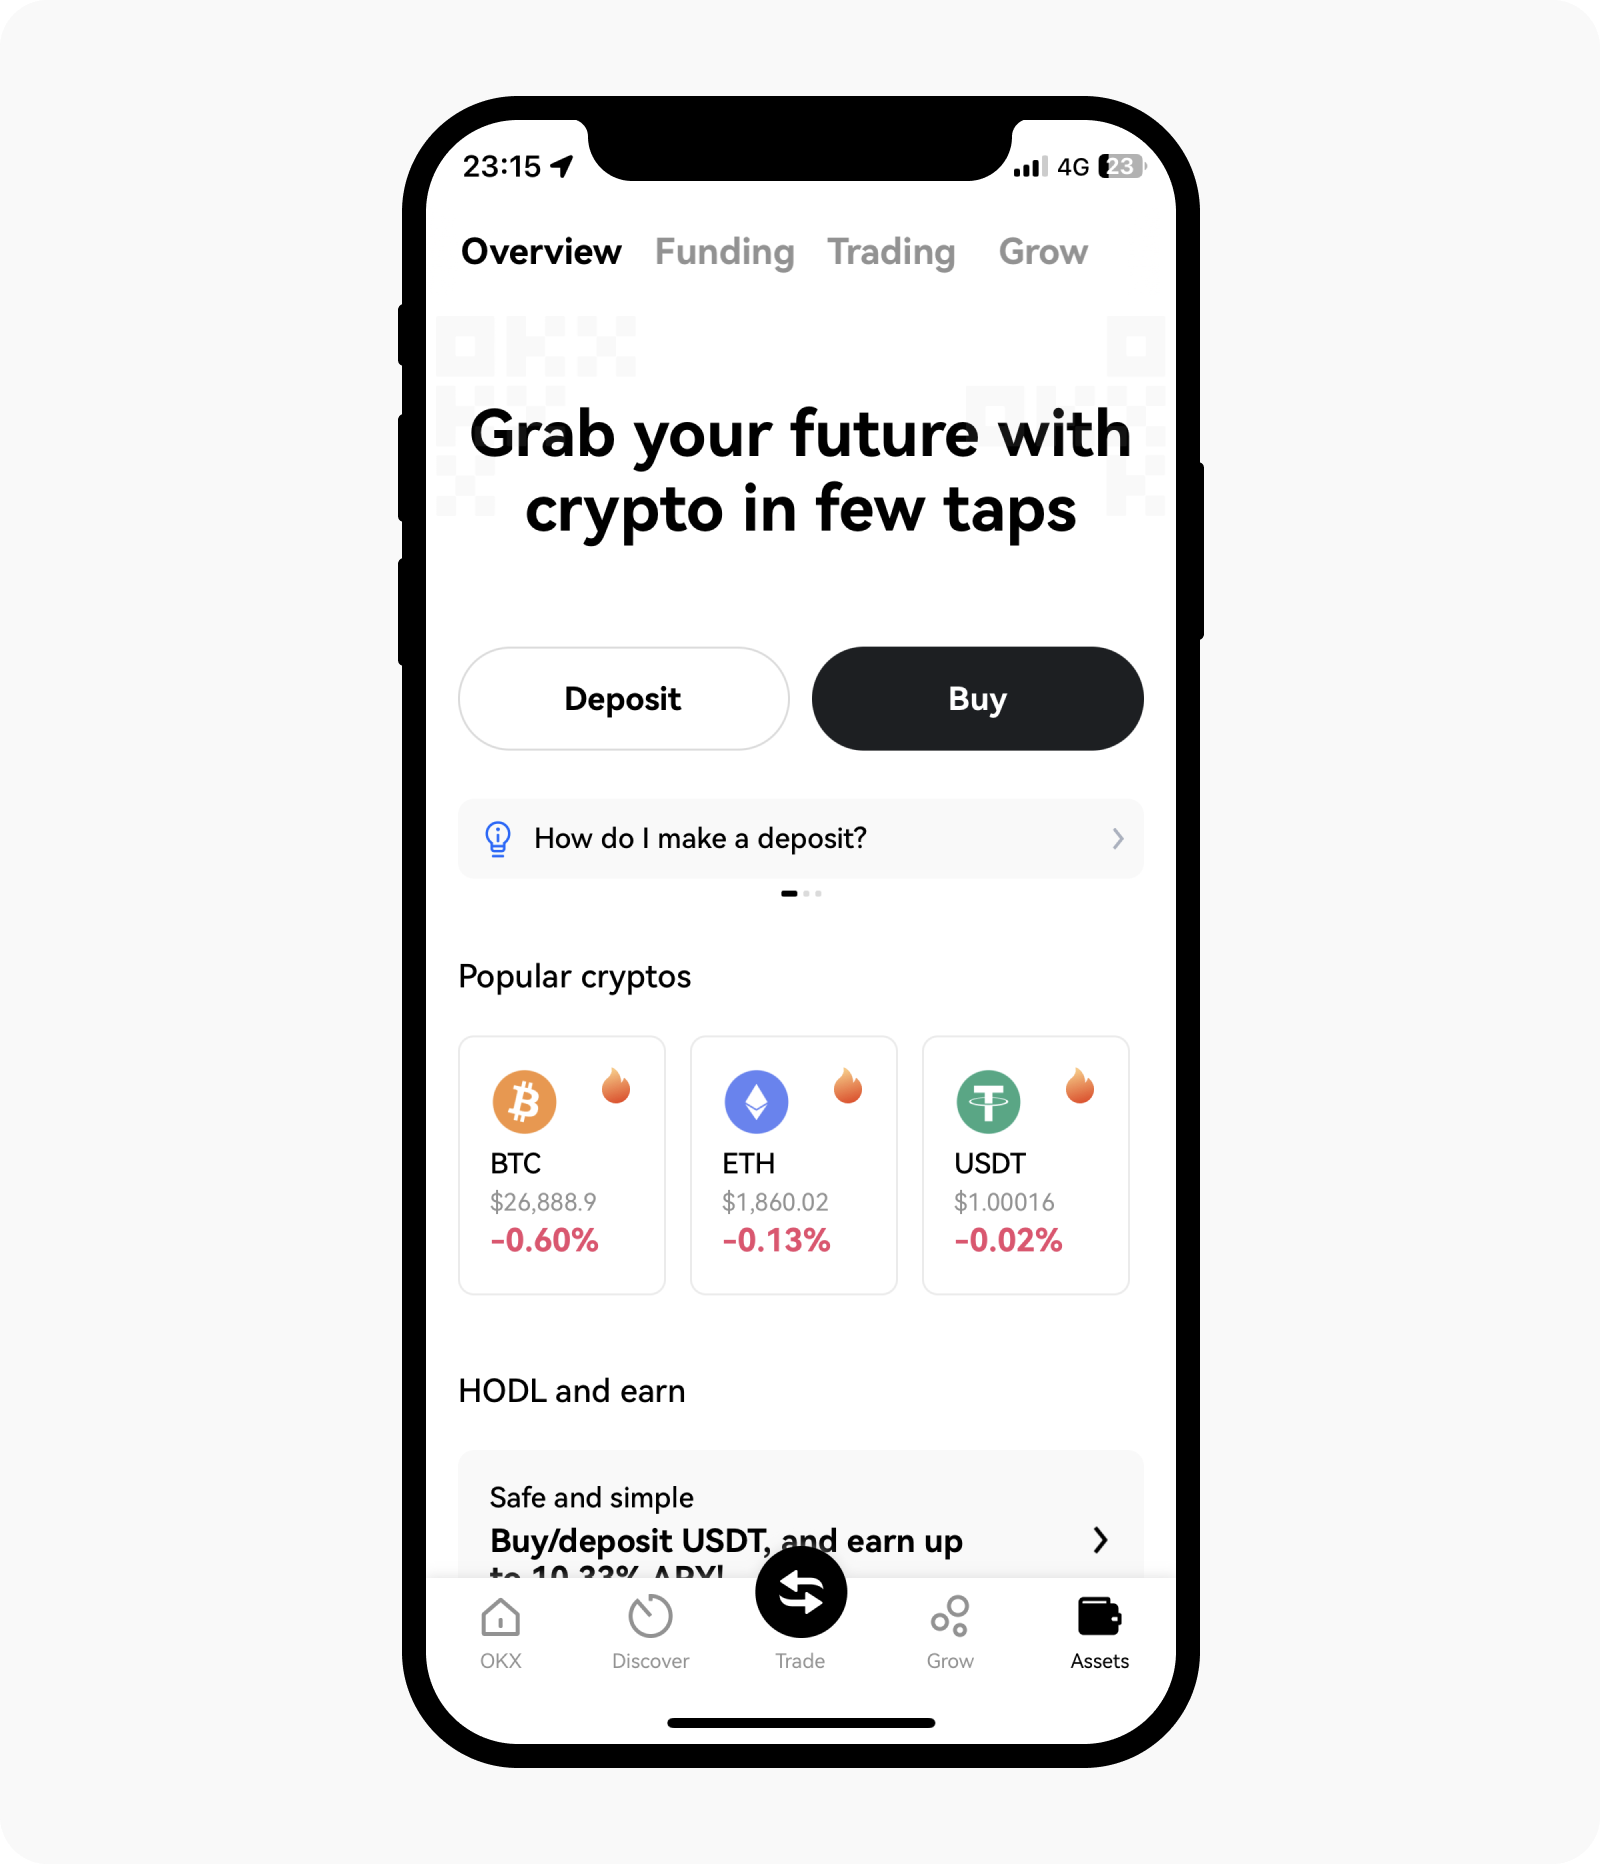 On App: Open deposit page in your standard sub-account